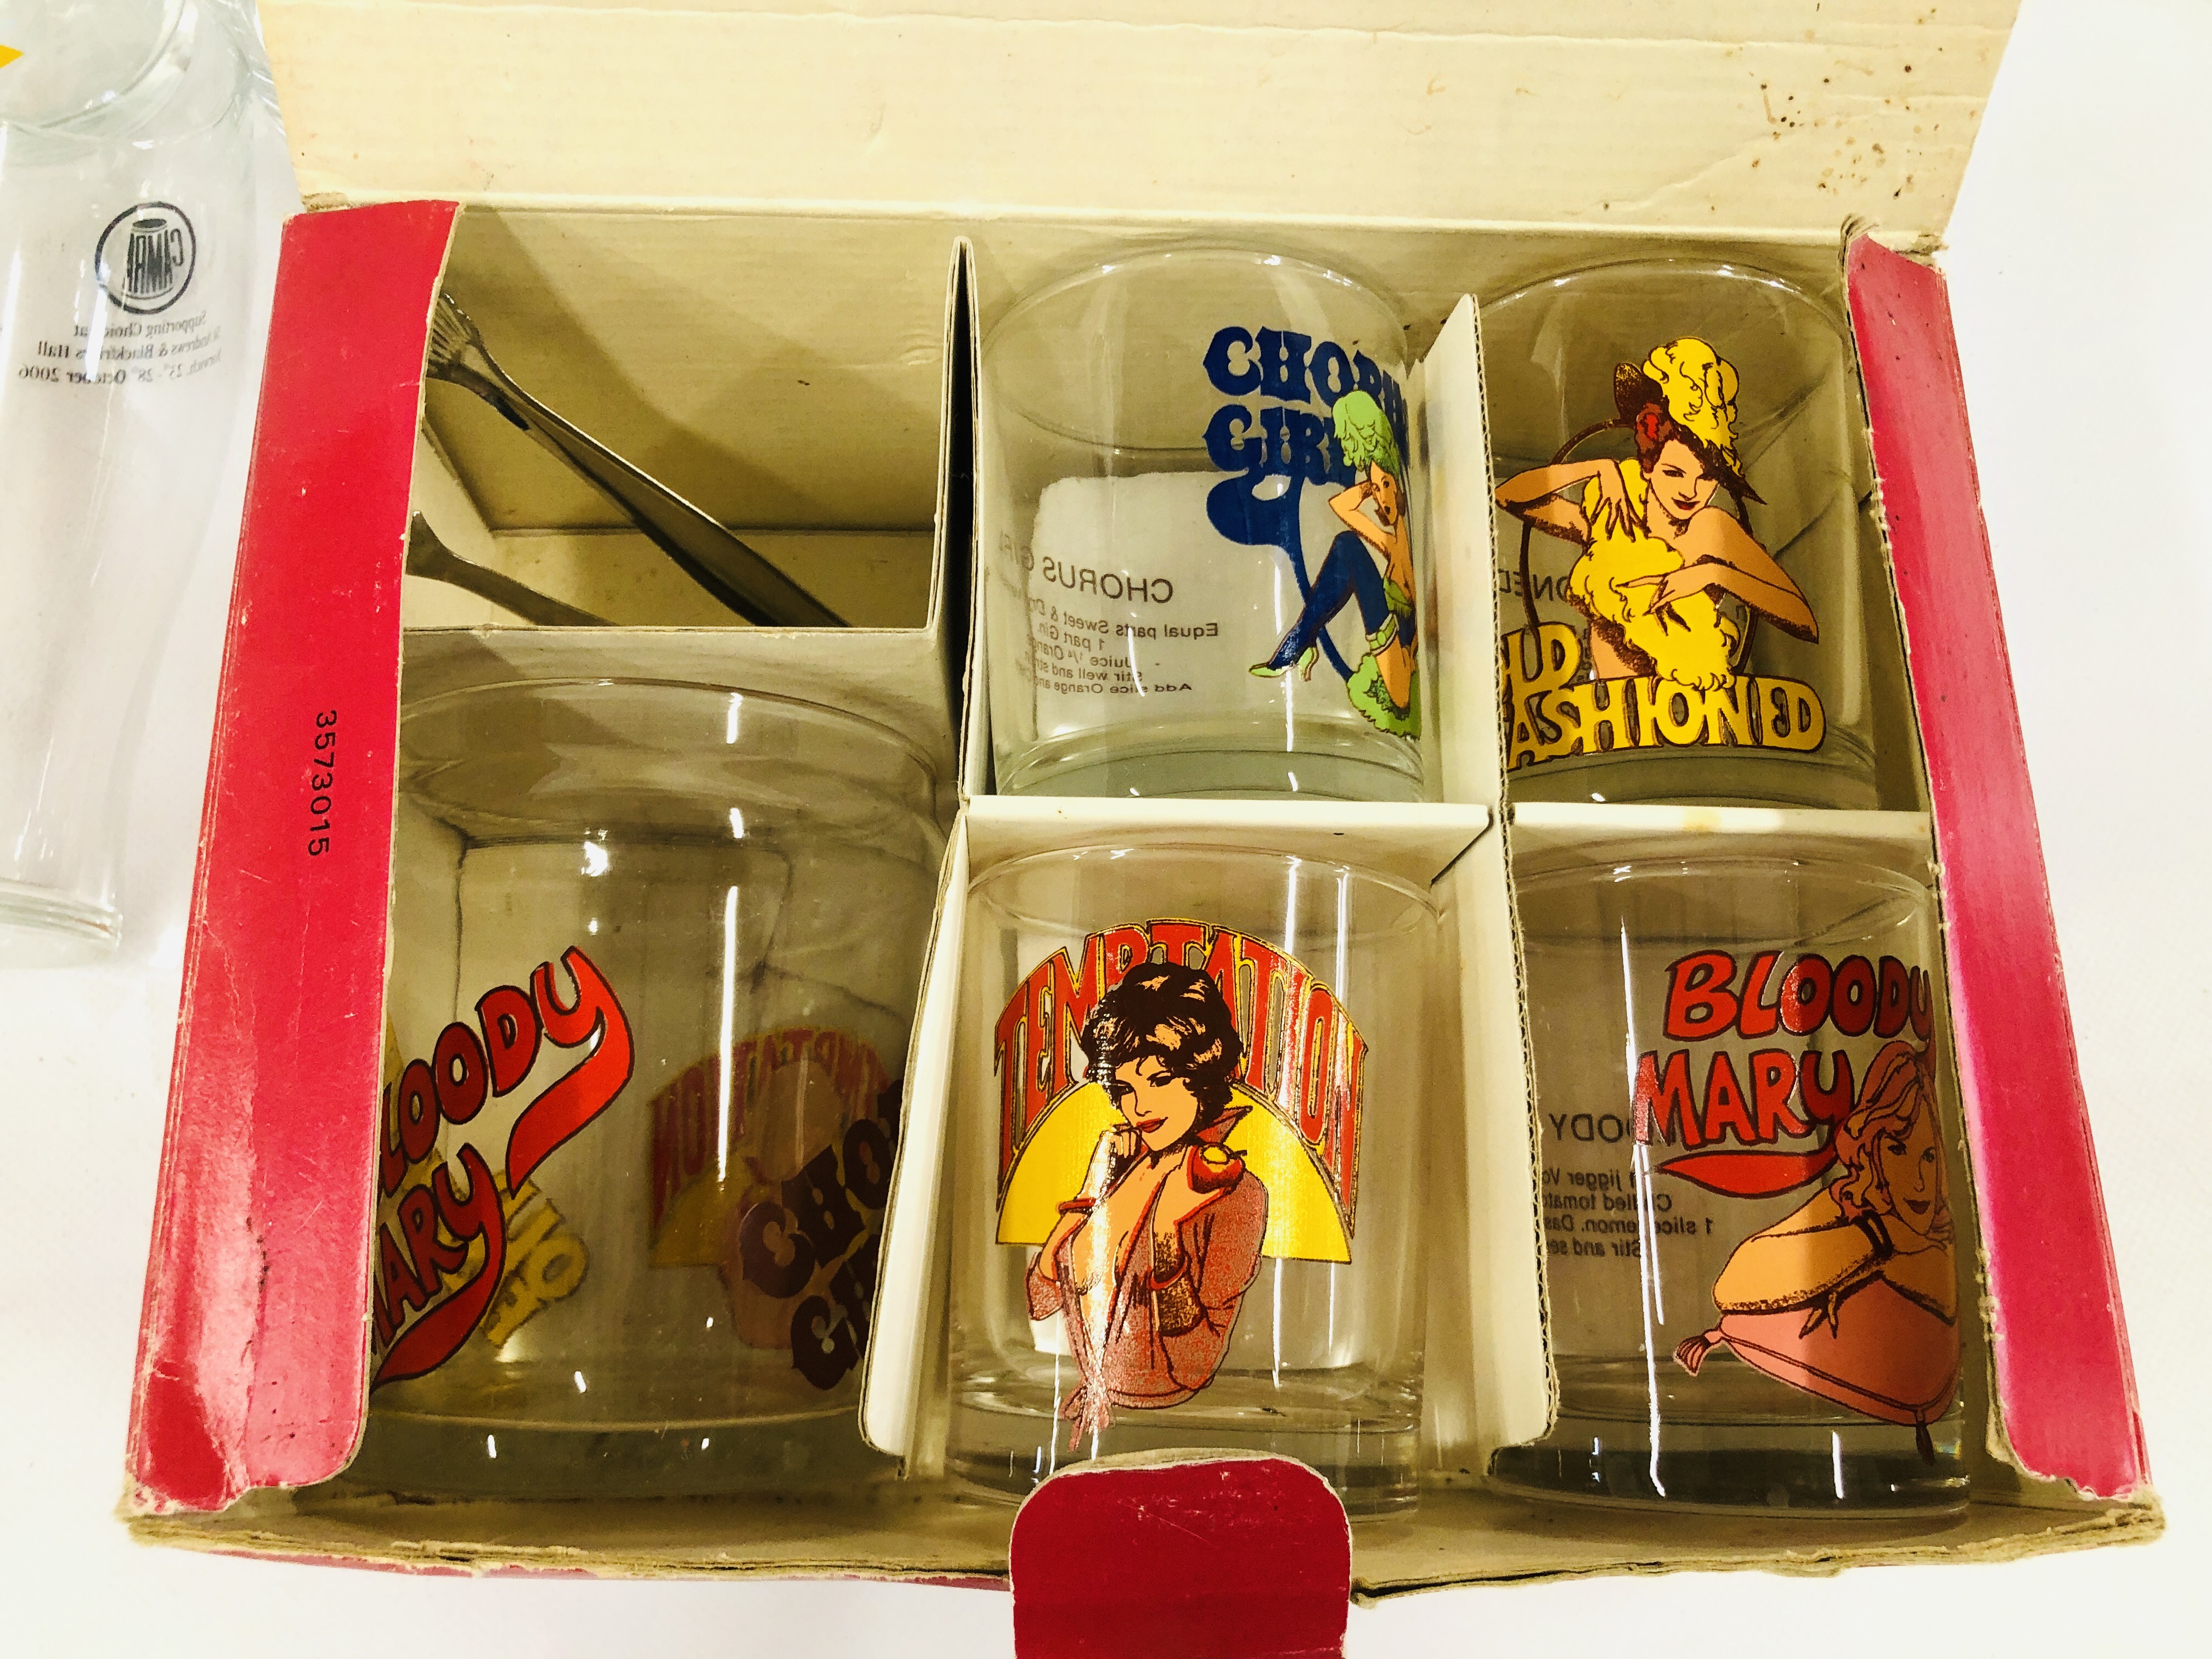 A COLLECTION OF 13 NORWICH BEER FESTIVAL GLASSES ALONG WITH A VINTAGE BOXED SET "BAR BELLES - Image 7 of 7